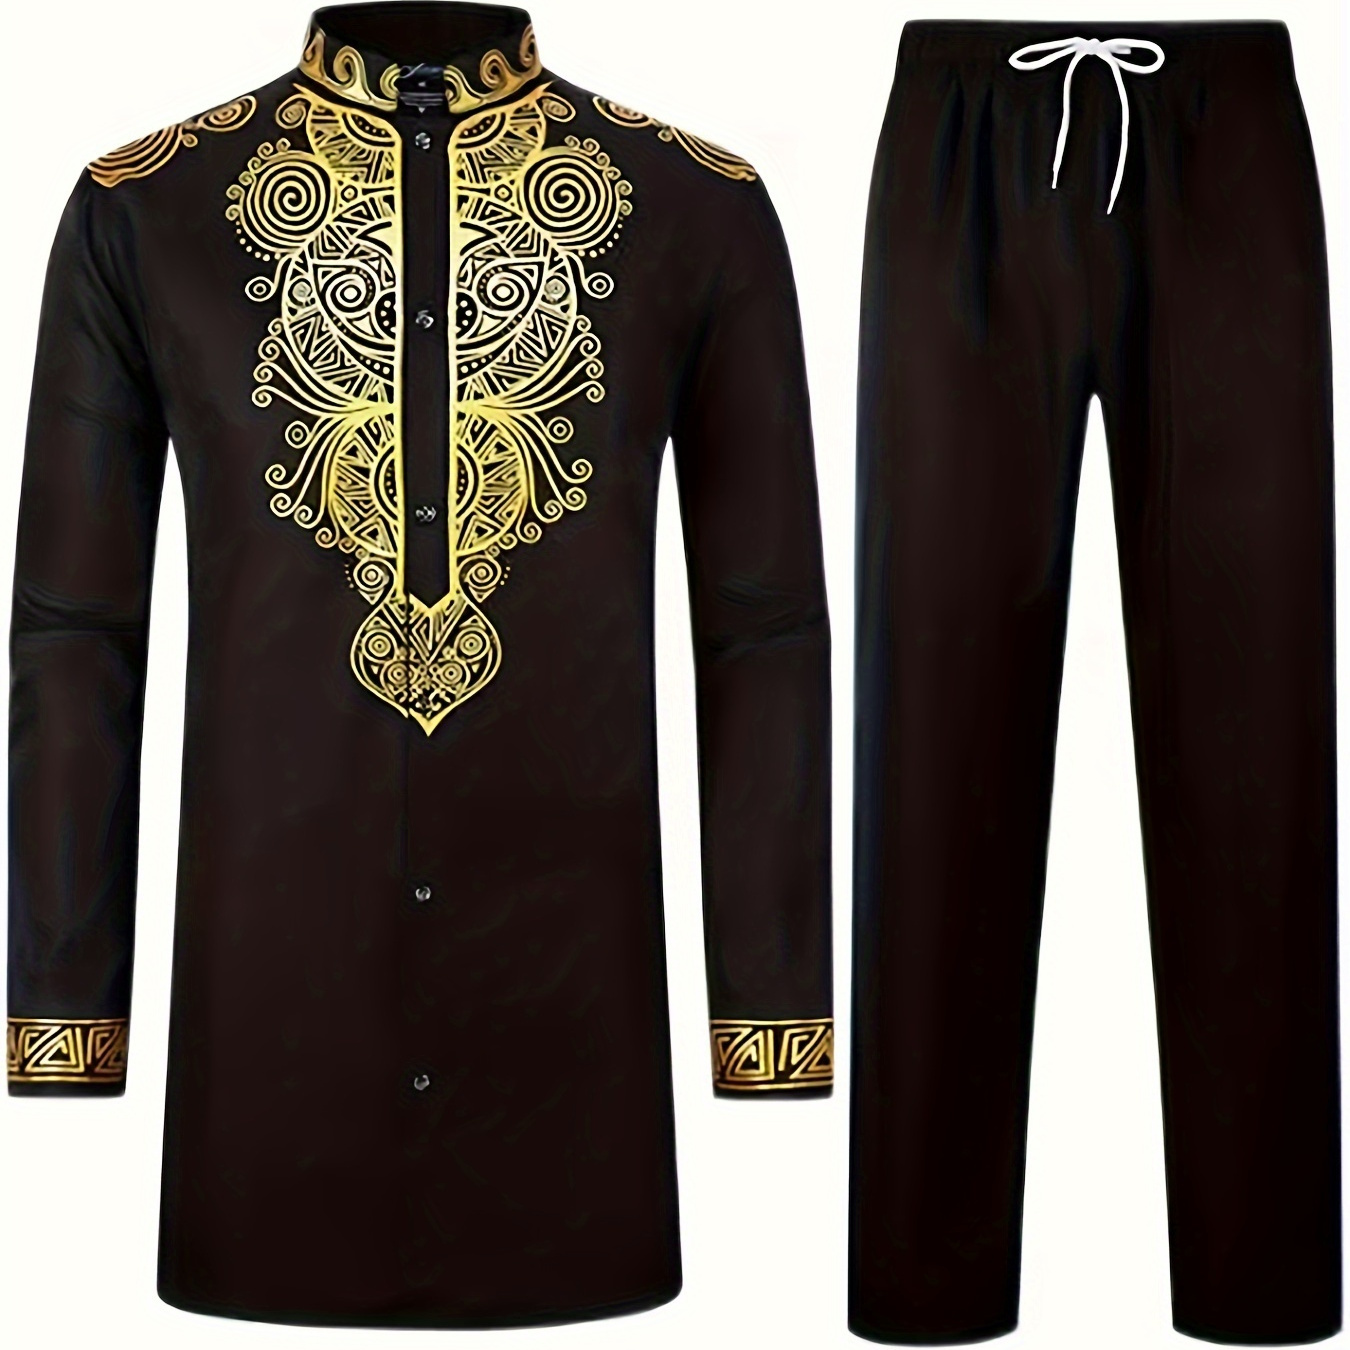 

2-piece Men's Traditional African Outfit Set With Exquisite Embroidery Design, Long Sleeve Button Up African Shirt And Pants Set